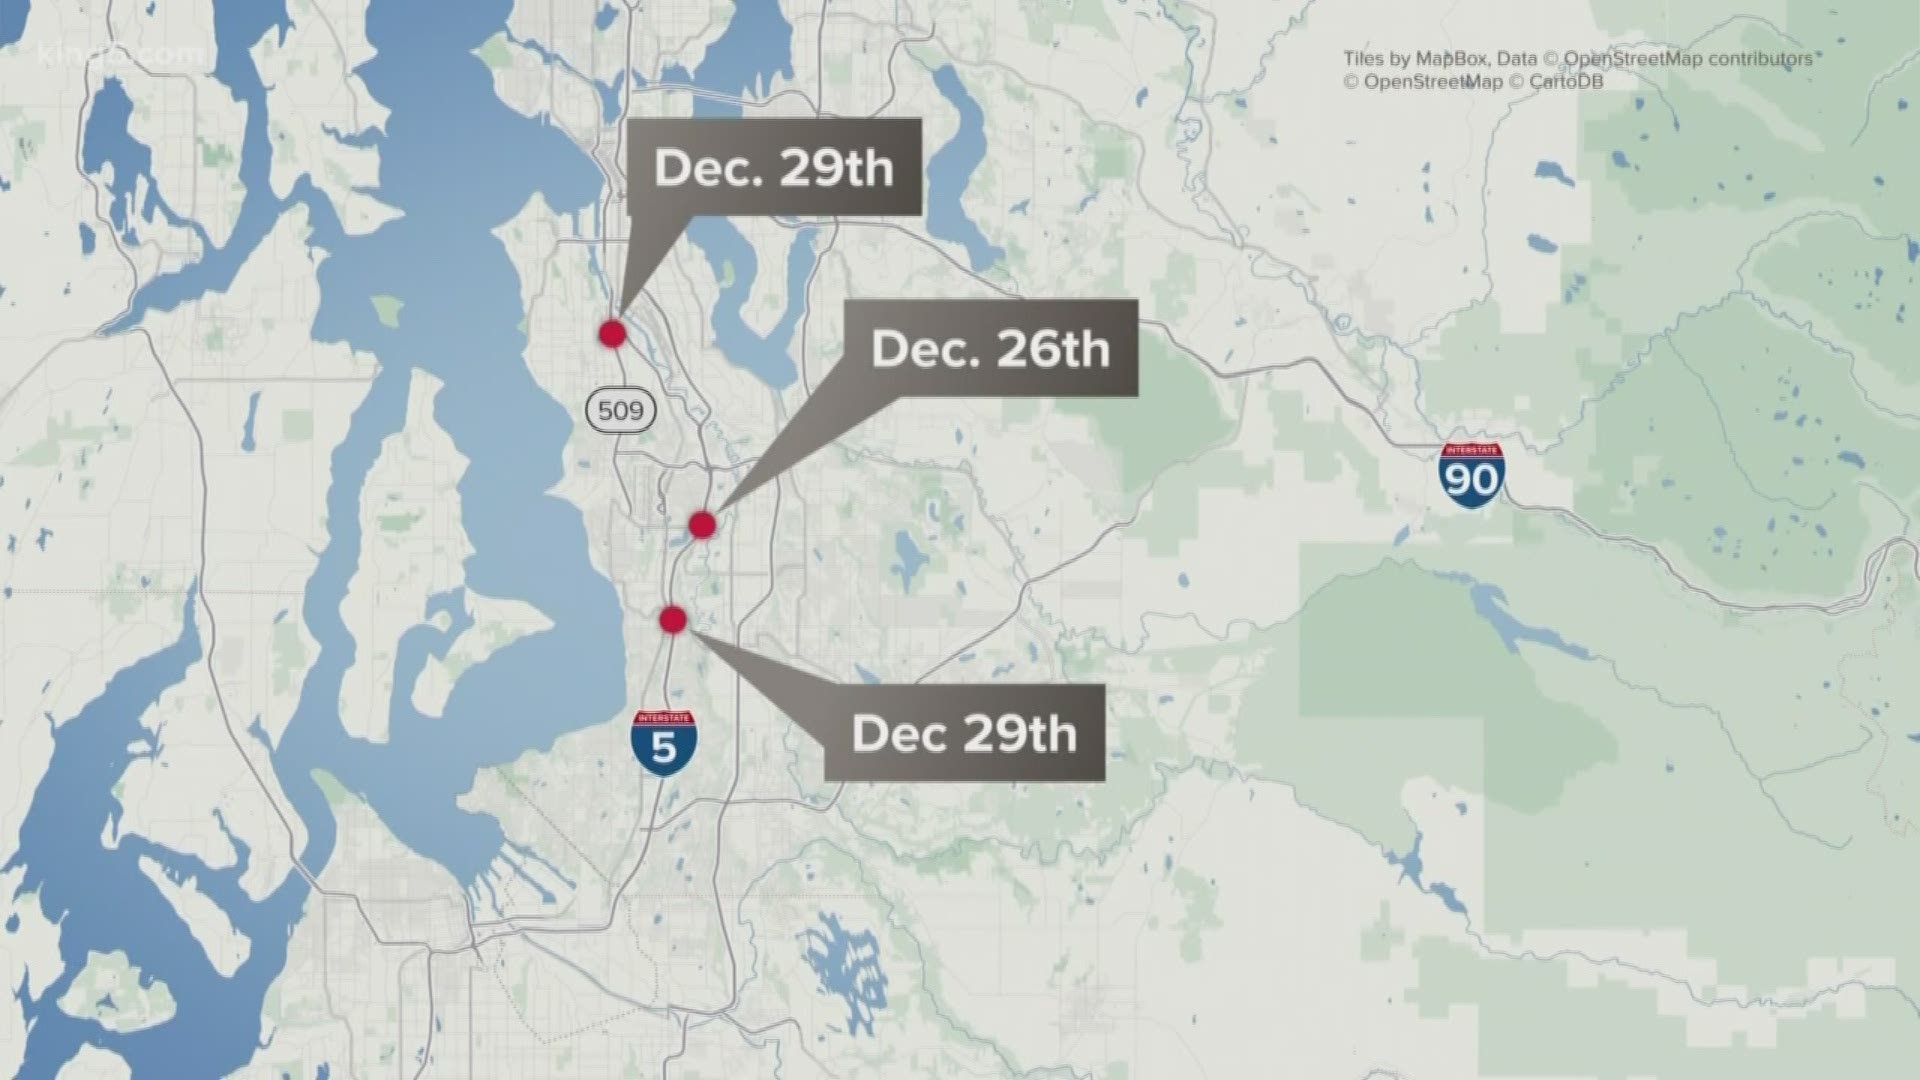 One person died after being shot in the face while driving on SR 509. The Washington State Patrol is investigating three roadway shootings since Dec. 26.